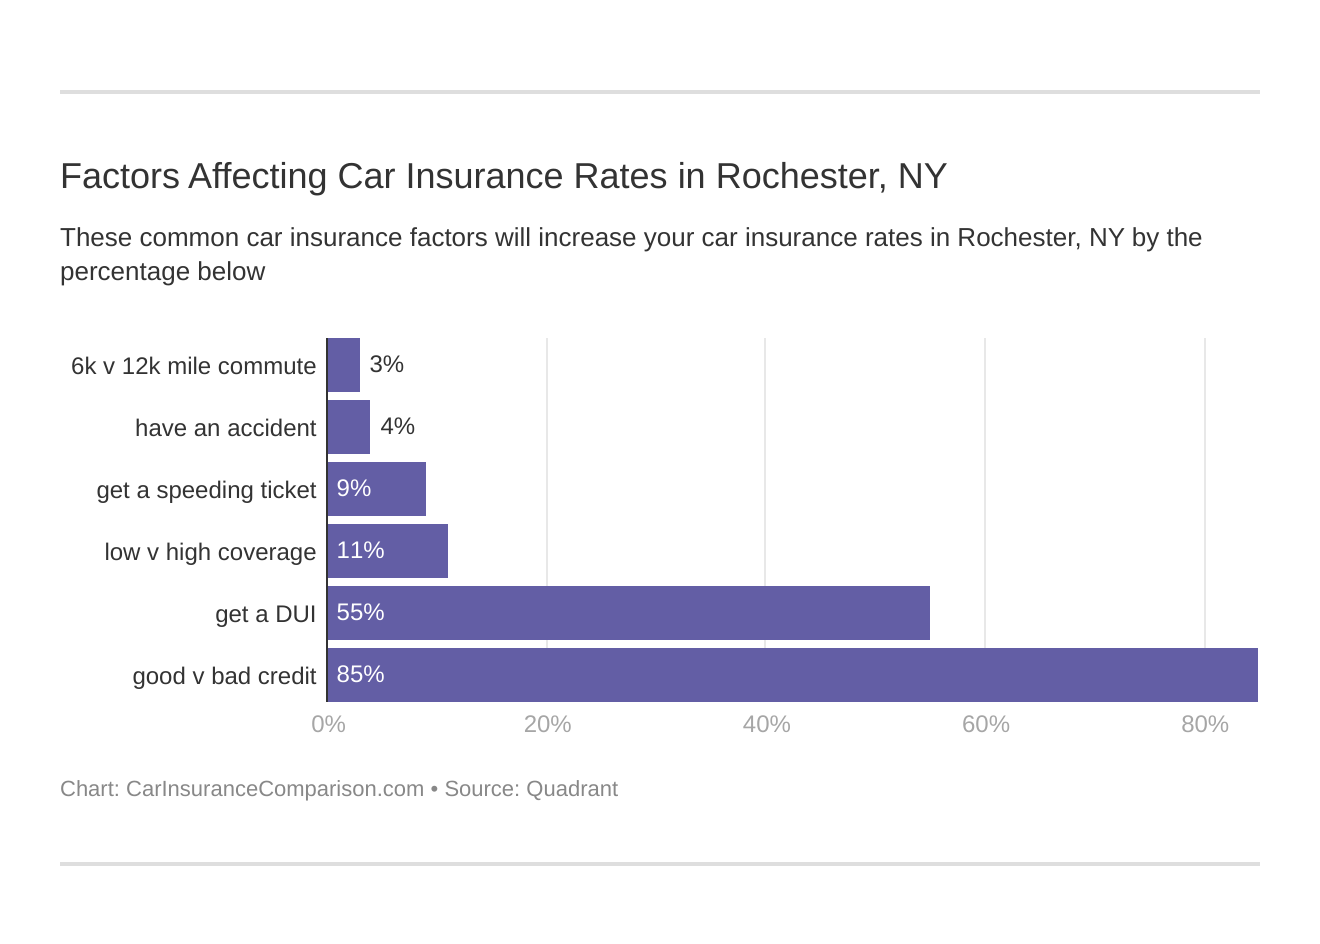 Factors Affecting Car Insurance Rates in Rochester, NY